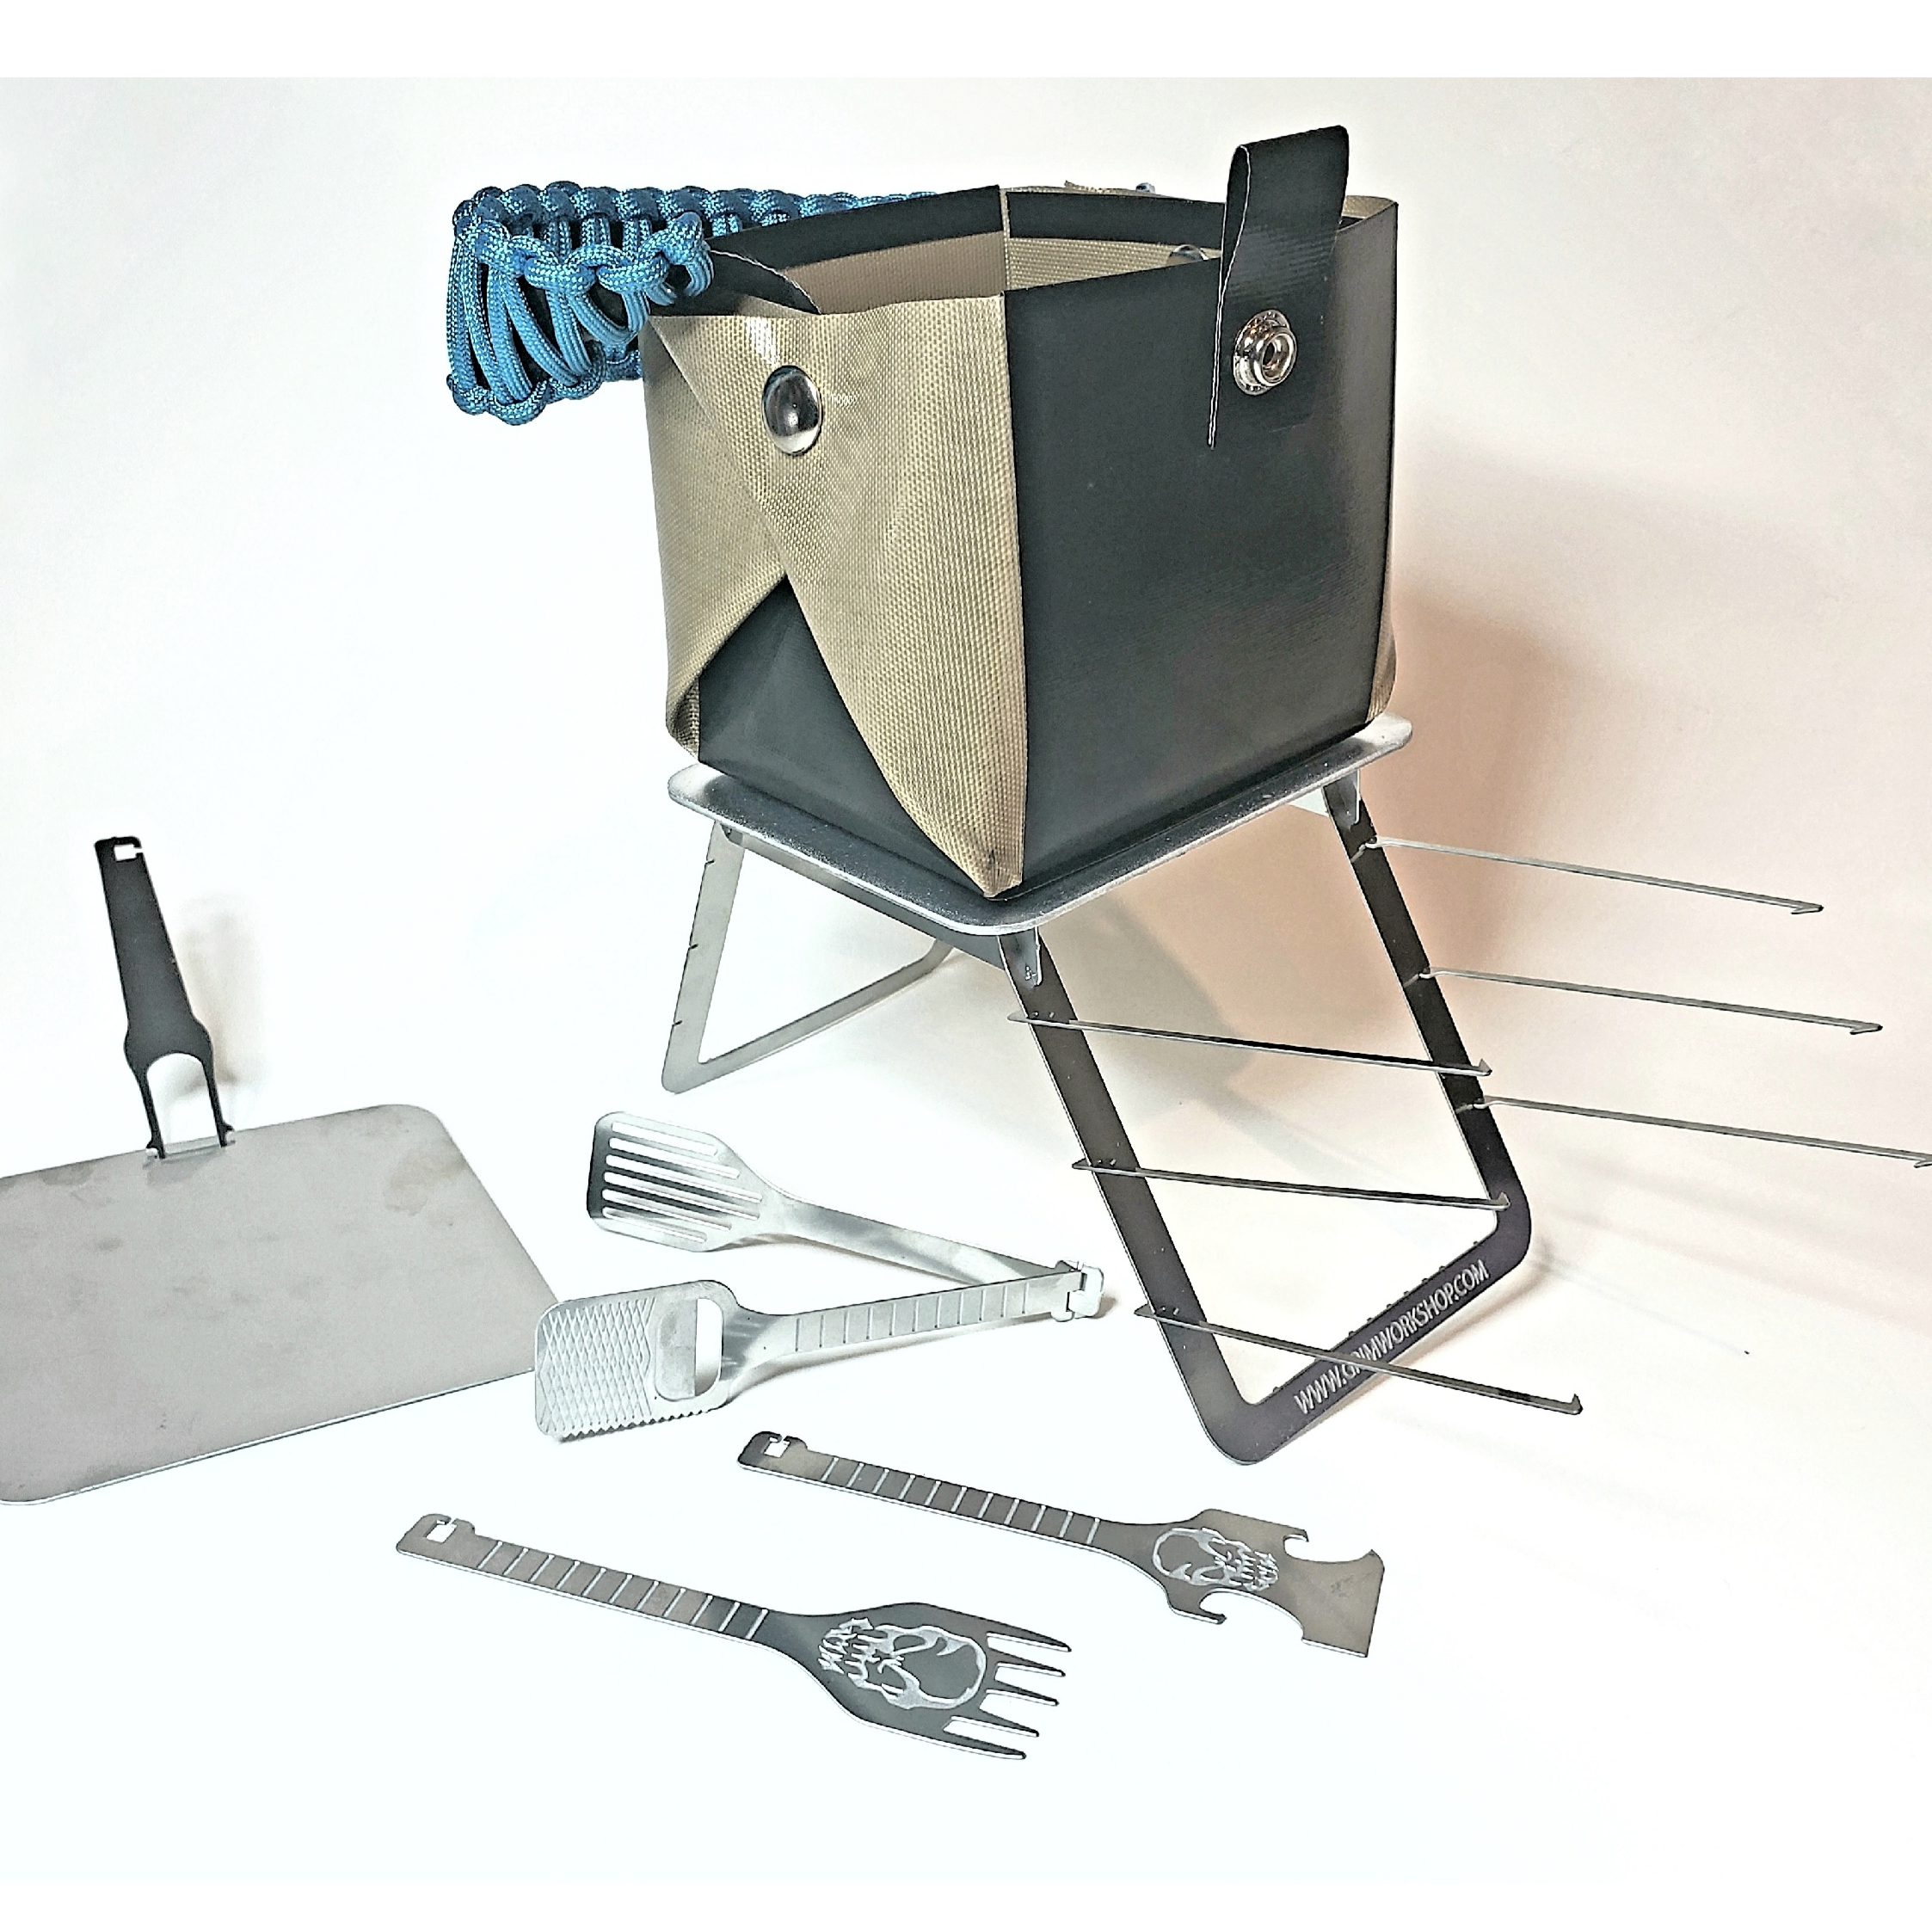 Grim and Bear It Cooking Set-Grimworkshop-bugoutbag-bushcraft-edc-gear-edctool-everydaycarry-survivalcard-survivalkit-wilderness-prepping-toolkit